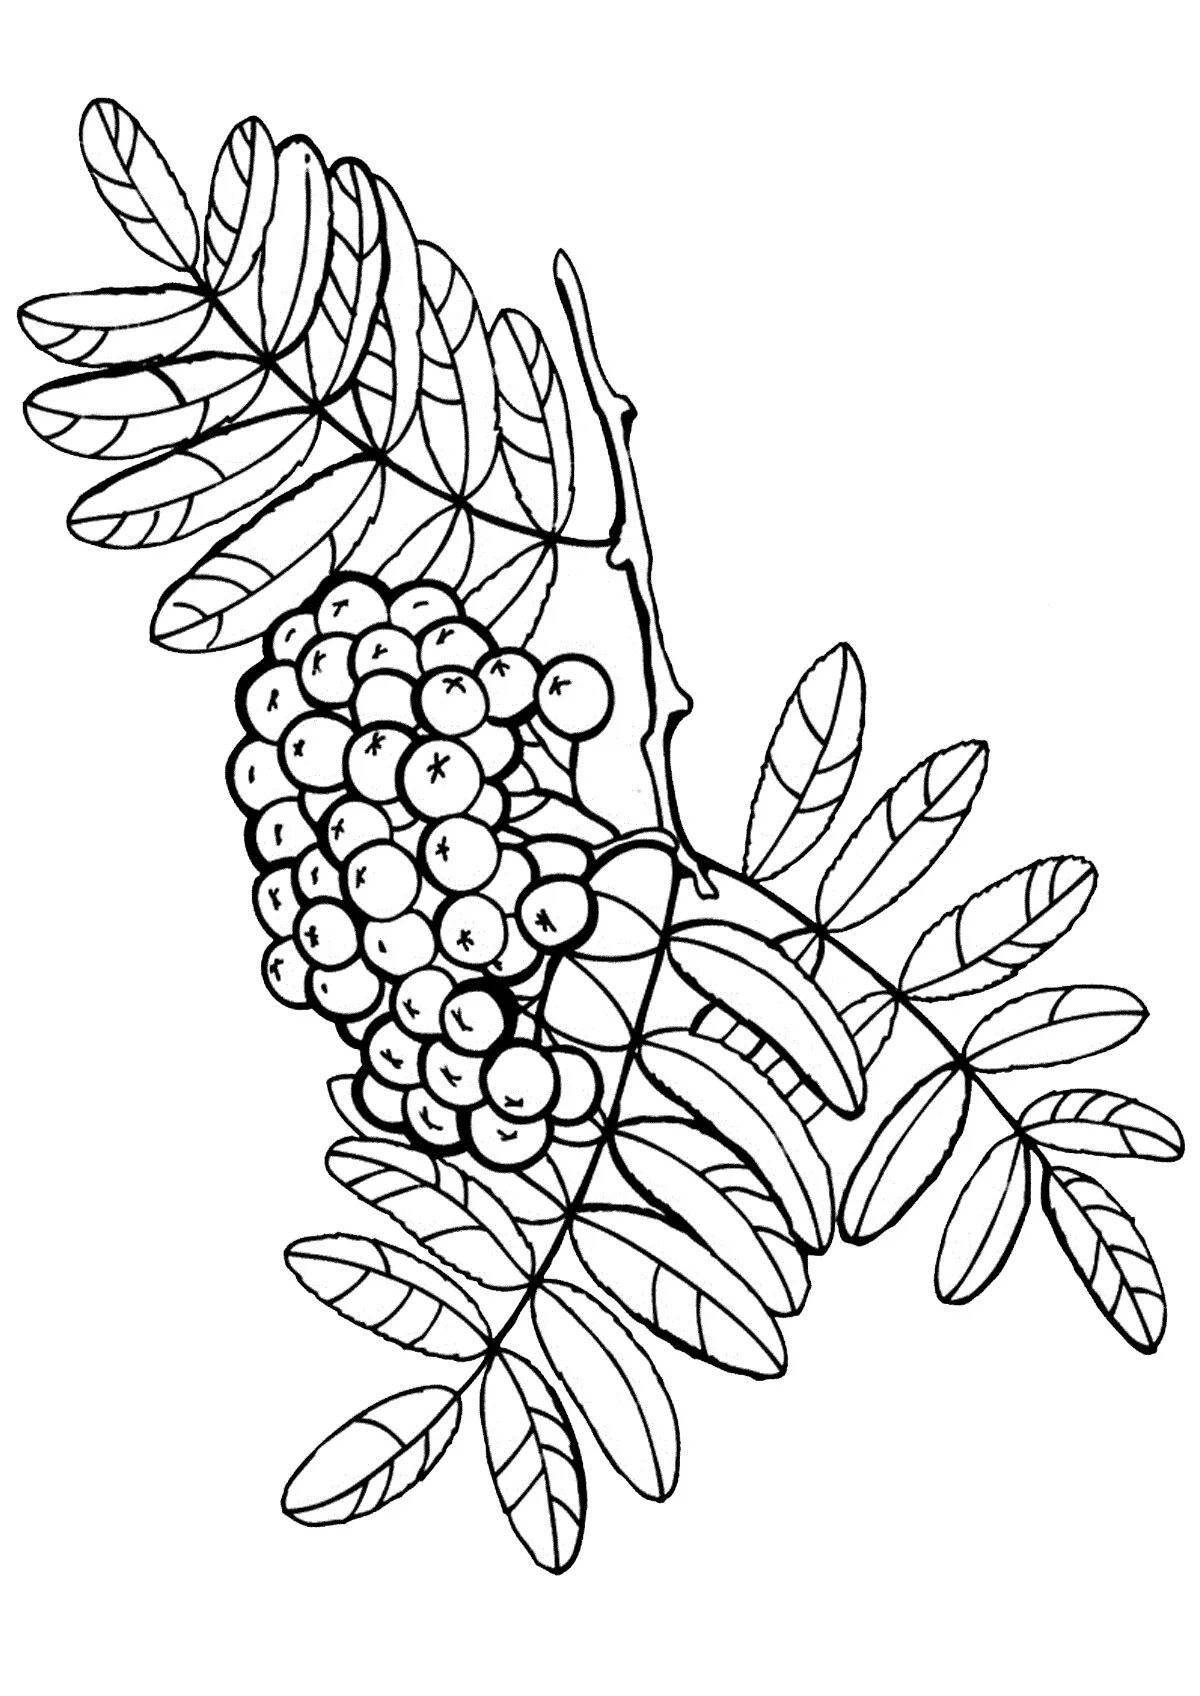 Sweet sea buckthorn coloring book for kids